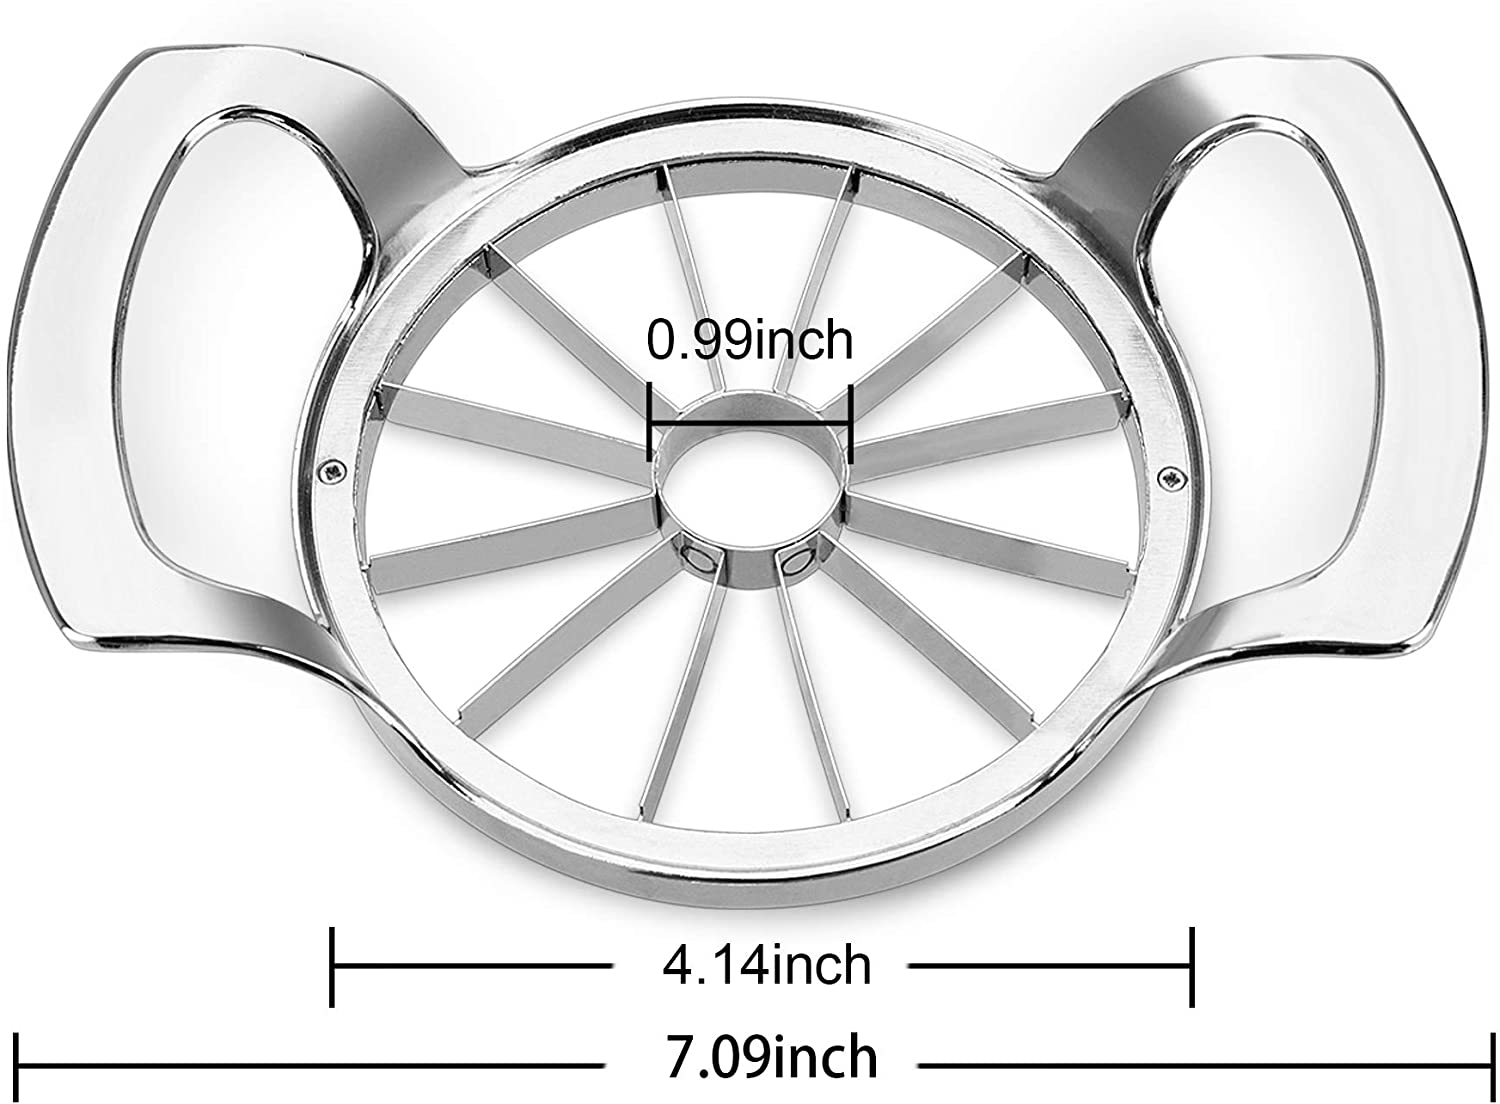 Apple Slicer with 12-Blade Extra Large Apple Cutter, Stainless Steel Ultra-Sharp Apple Corer, Heavy Duty Apple Corer Tool for Up to 4 Inches Apples - image 2 of 7